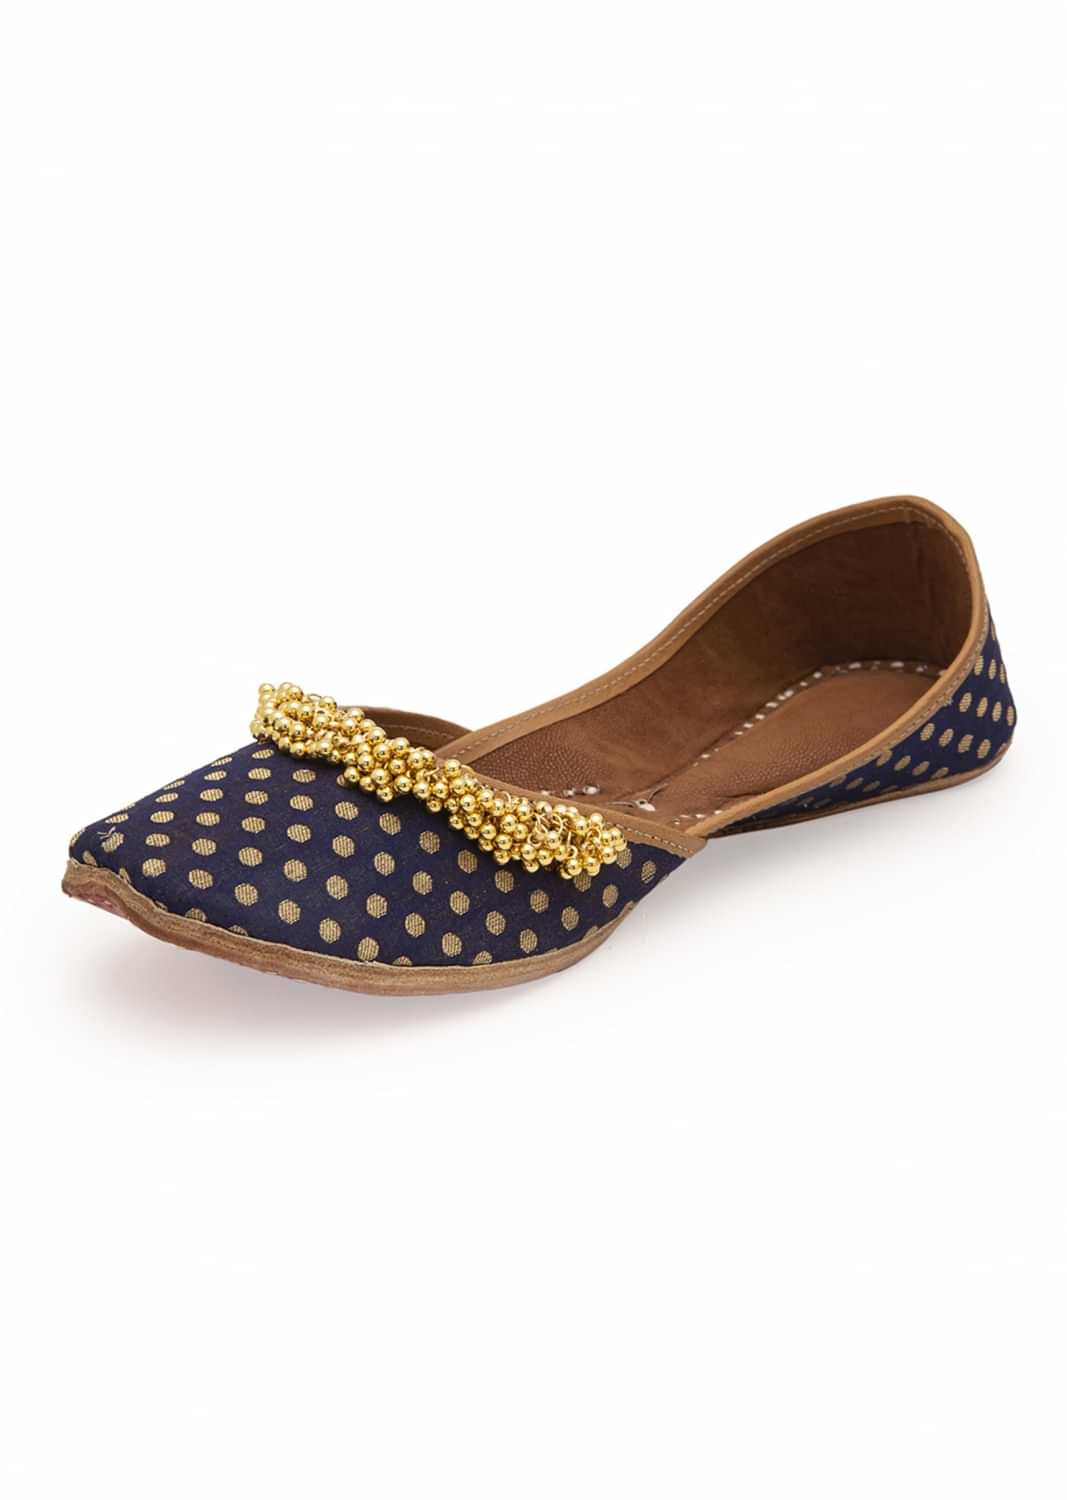 Blue Printed Juttis In Silk With Ghungroo Embellishment And Leather Underlining